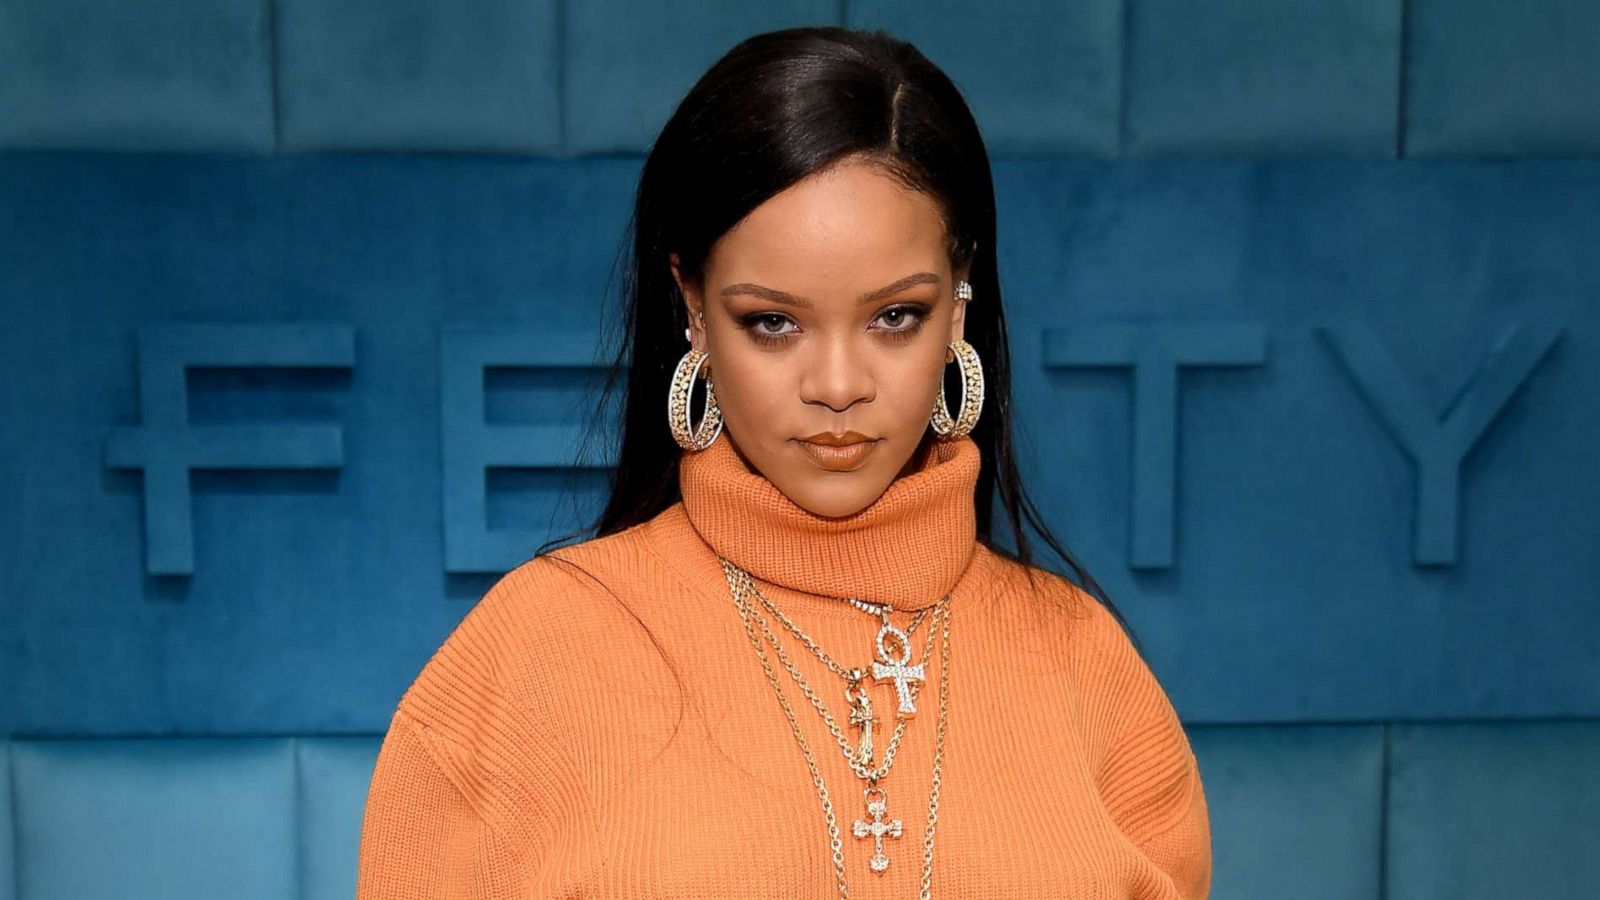 LVMH closes Rihanna's Fenty fashion line 2 years after launch - Good  Morning America